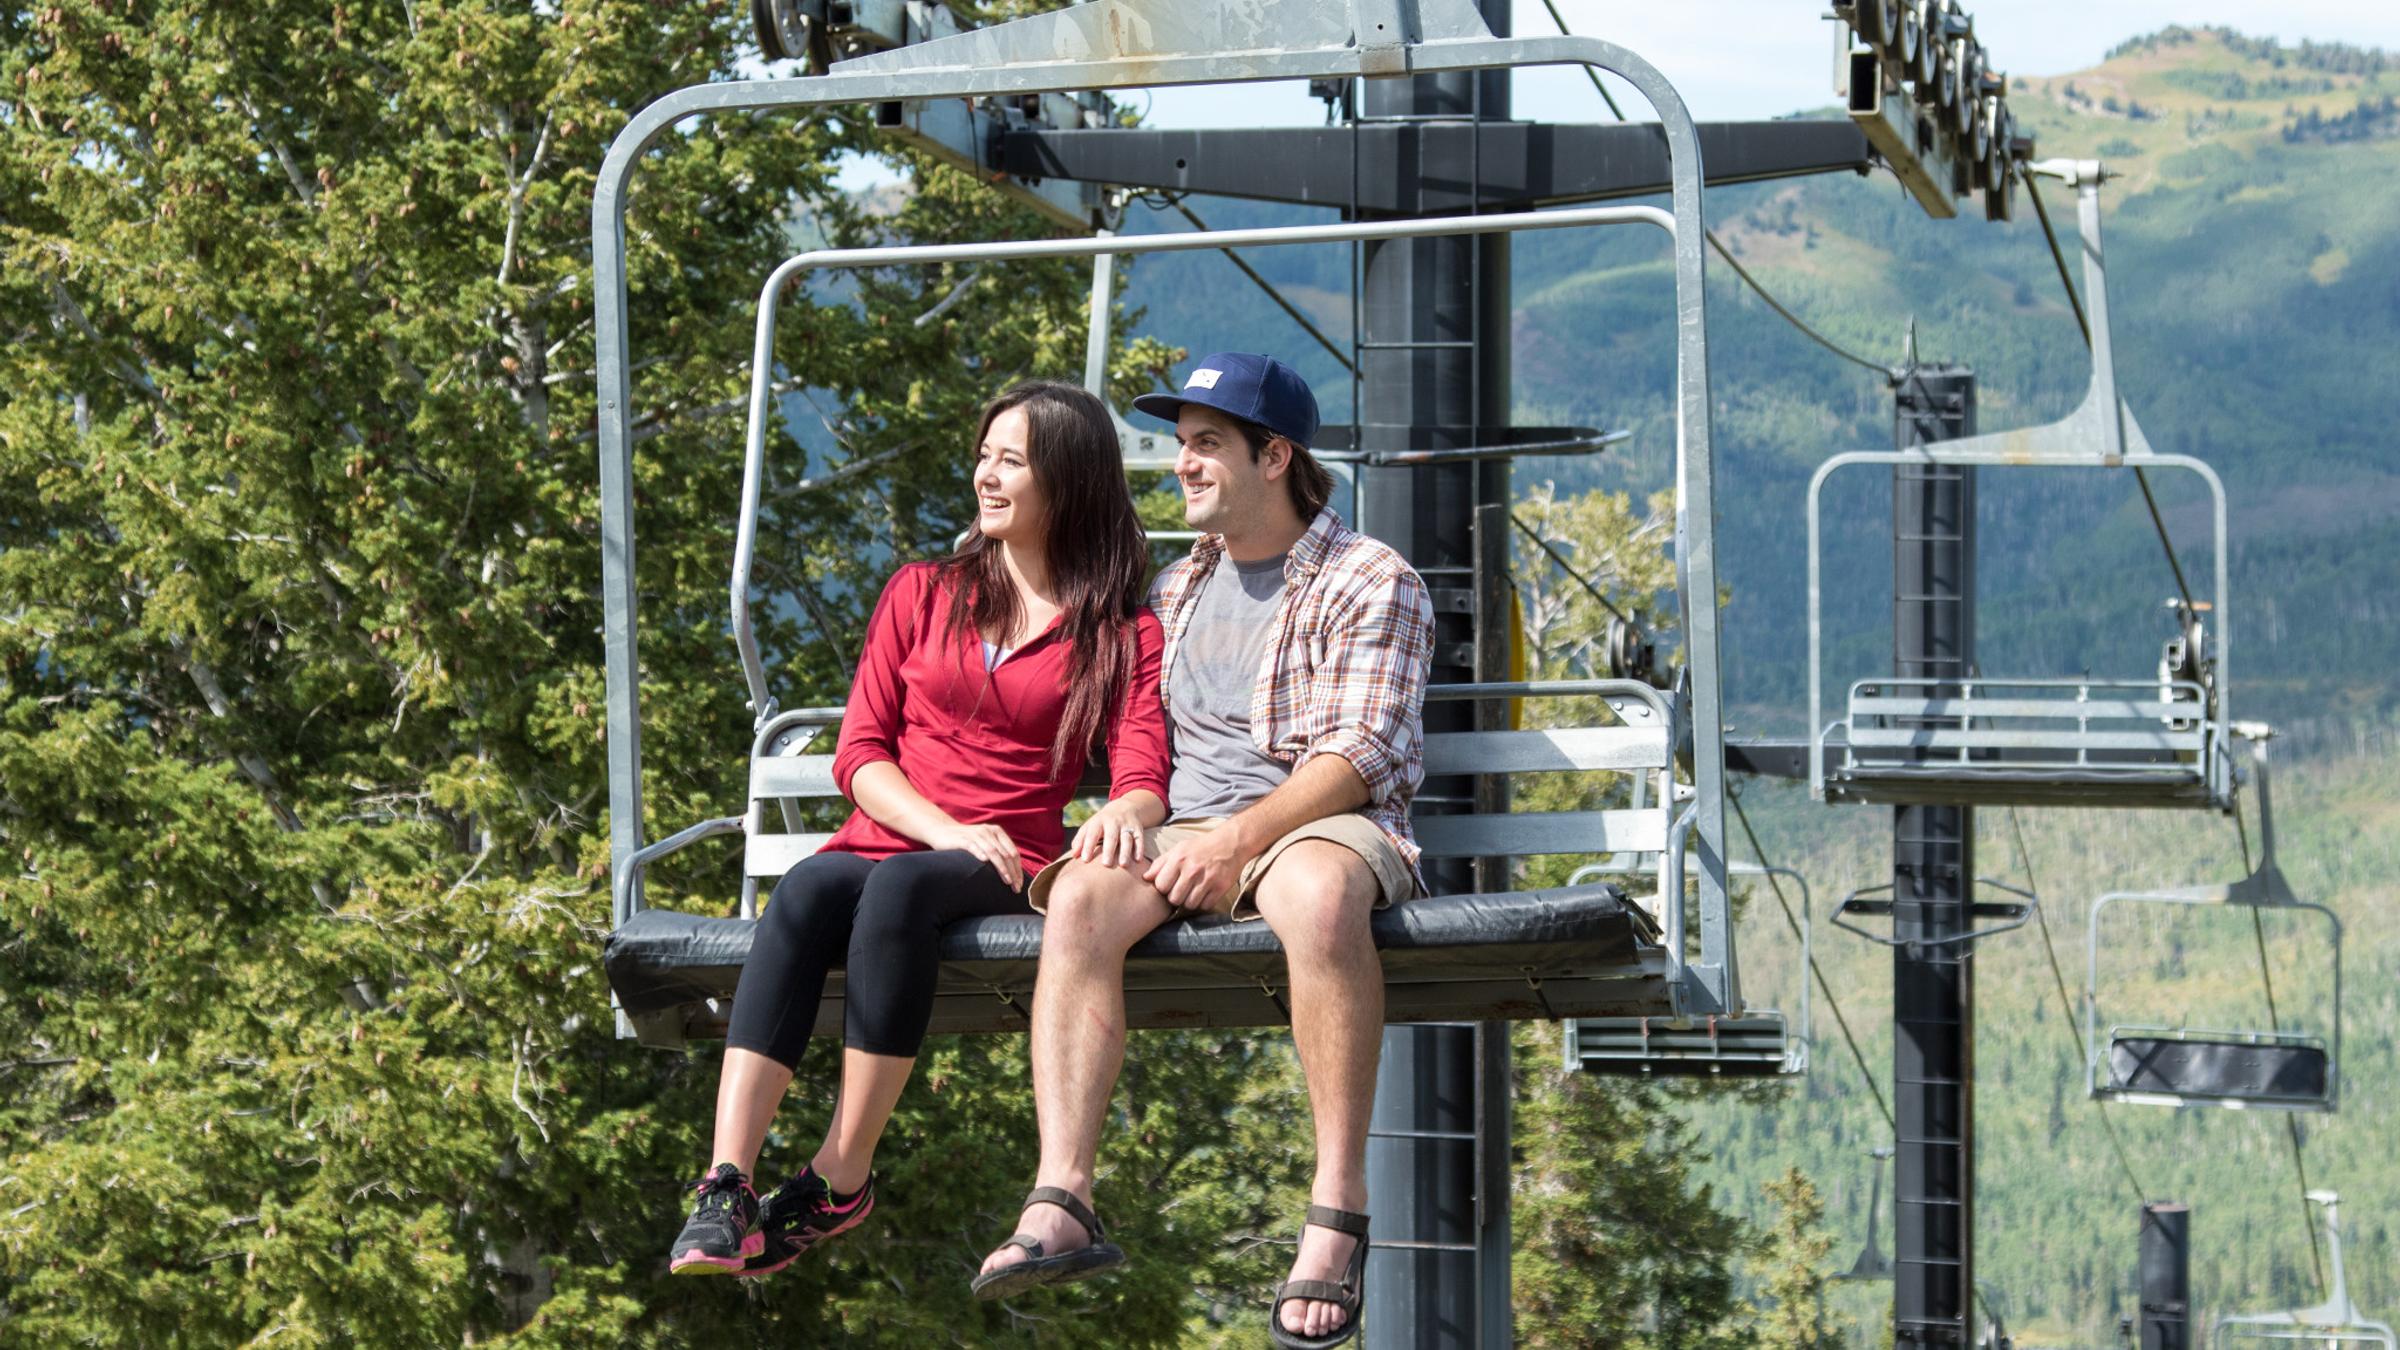 A couple on a chairlift for a summer scenic lift ride up the mountain